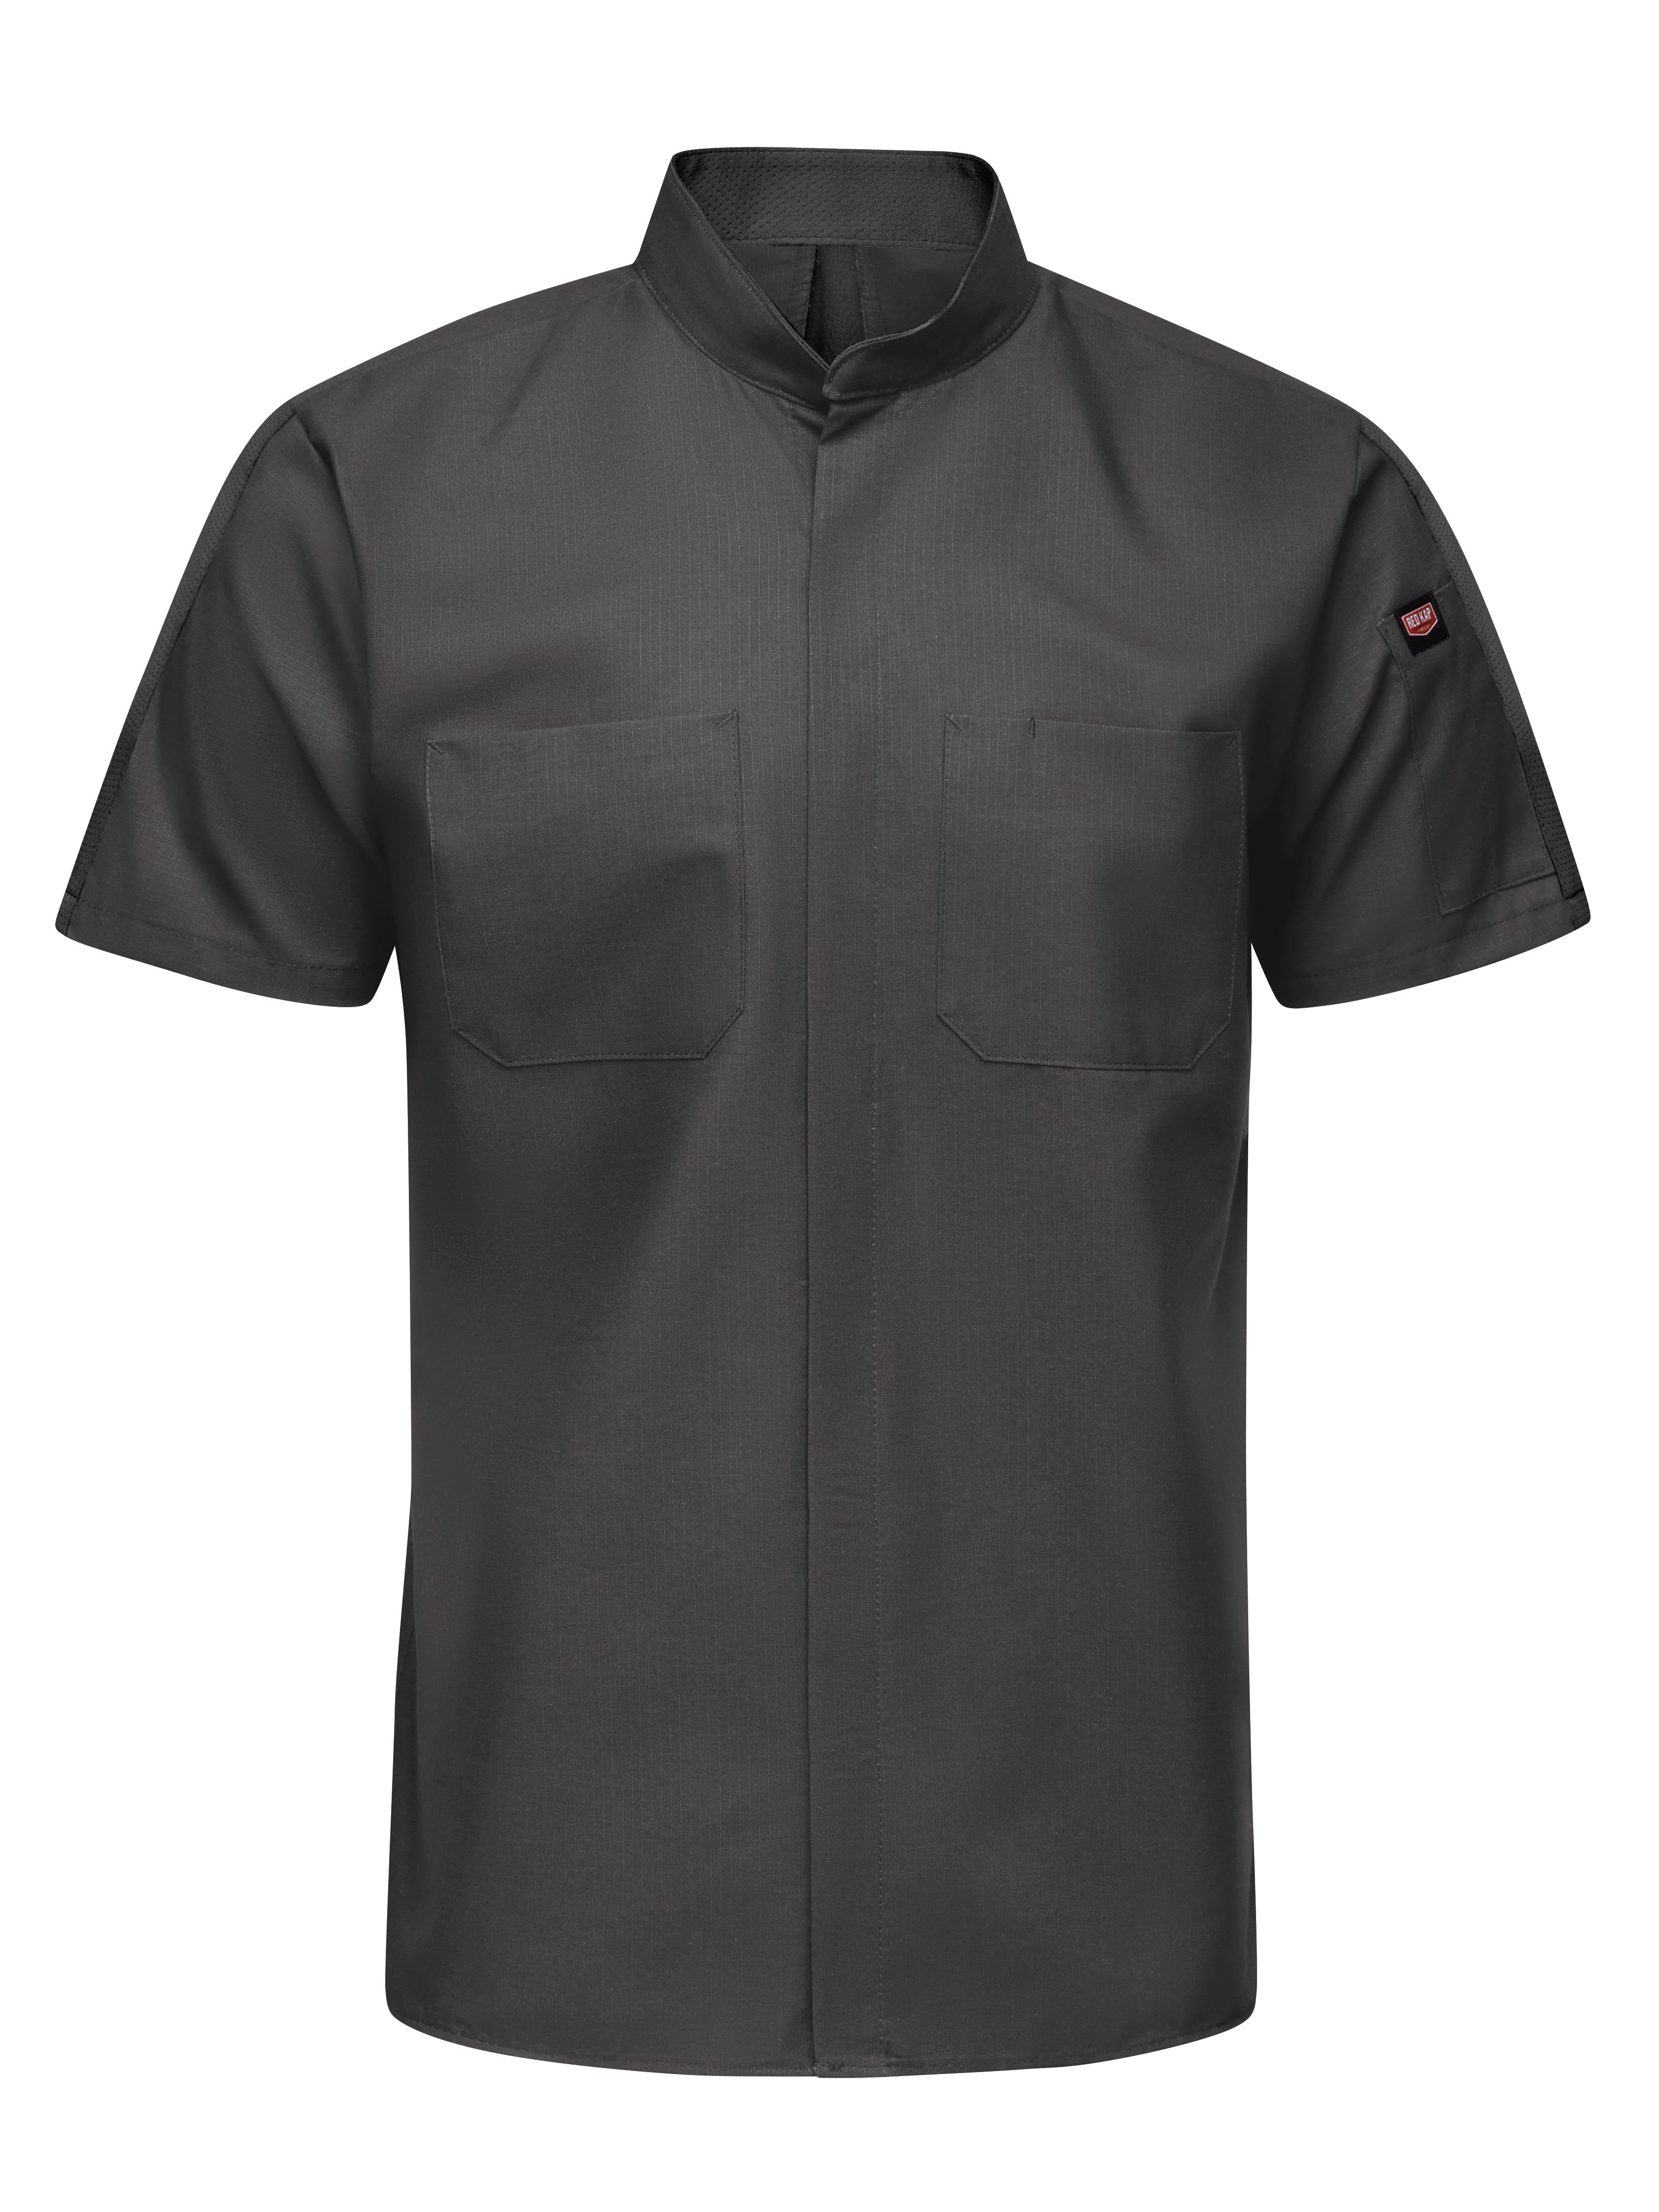 Men's Short Sleeve Pro+ Work Shirt with OilBlok and Mimix SX46 - Charcoal-eSafety Supplies, Inc